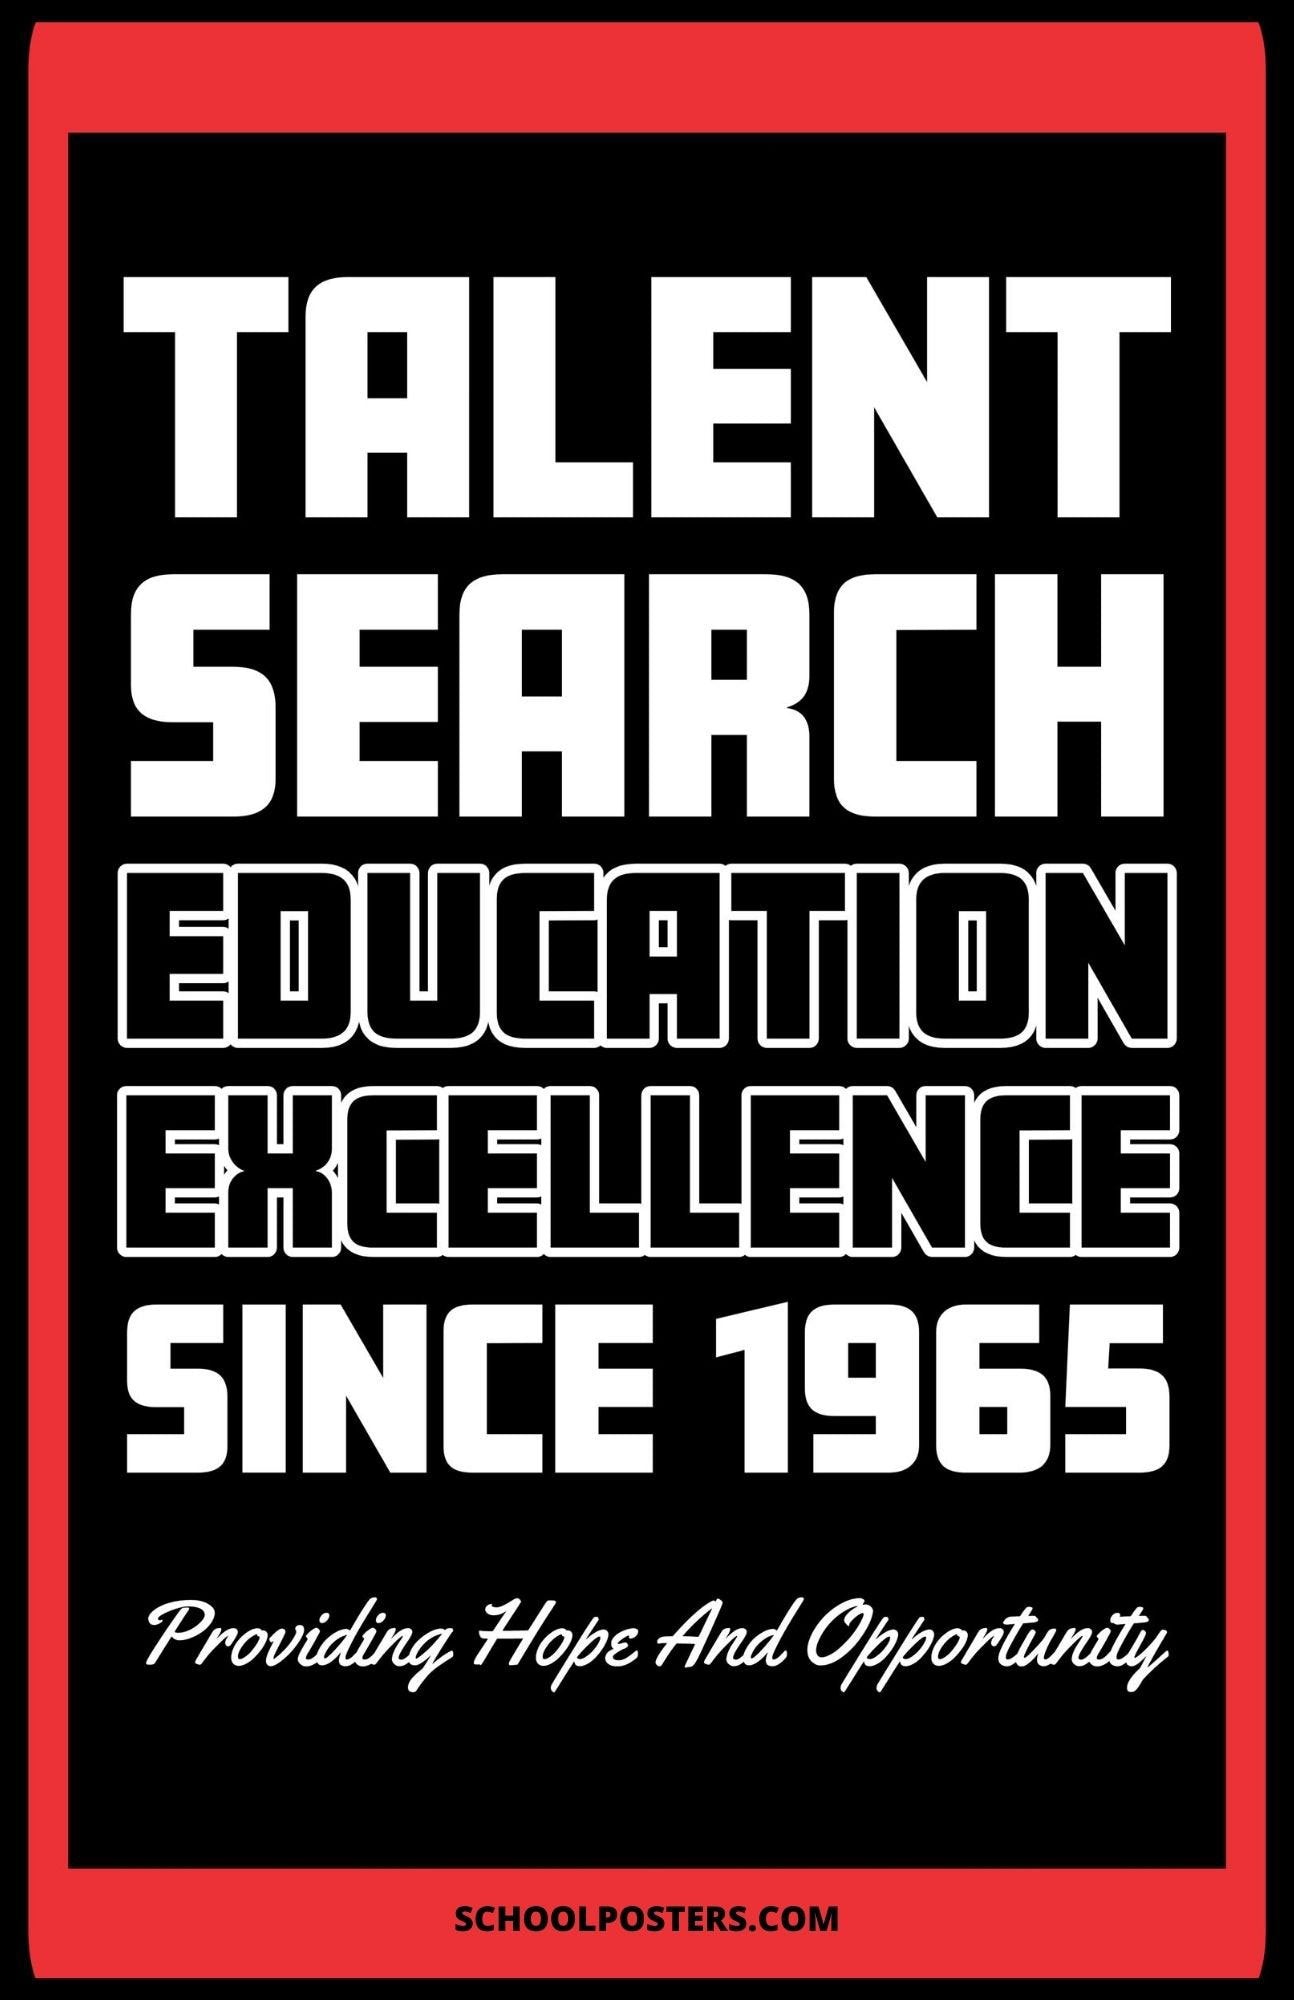 TRIO Talent Search Education Excellence Poster